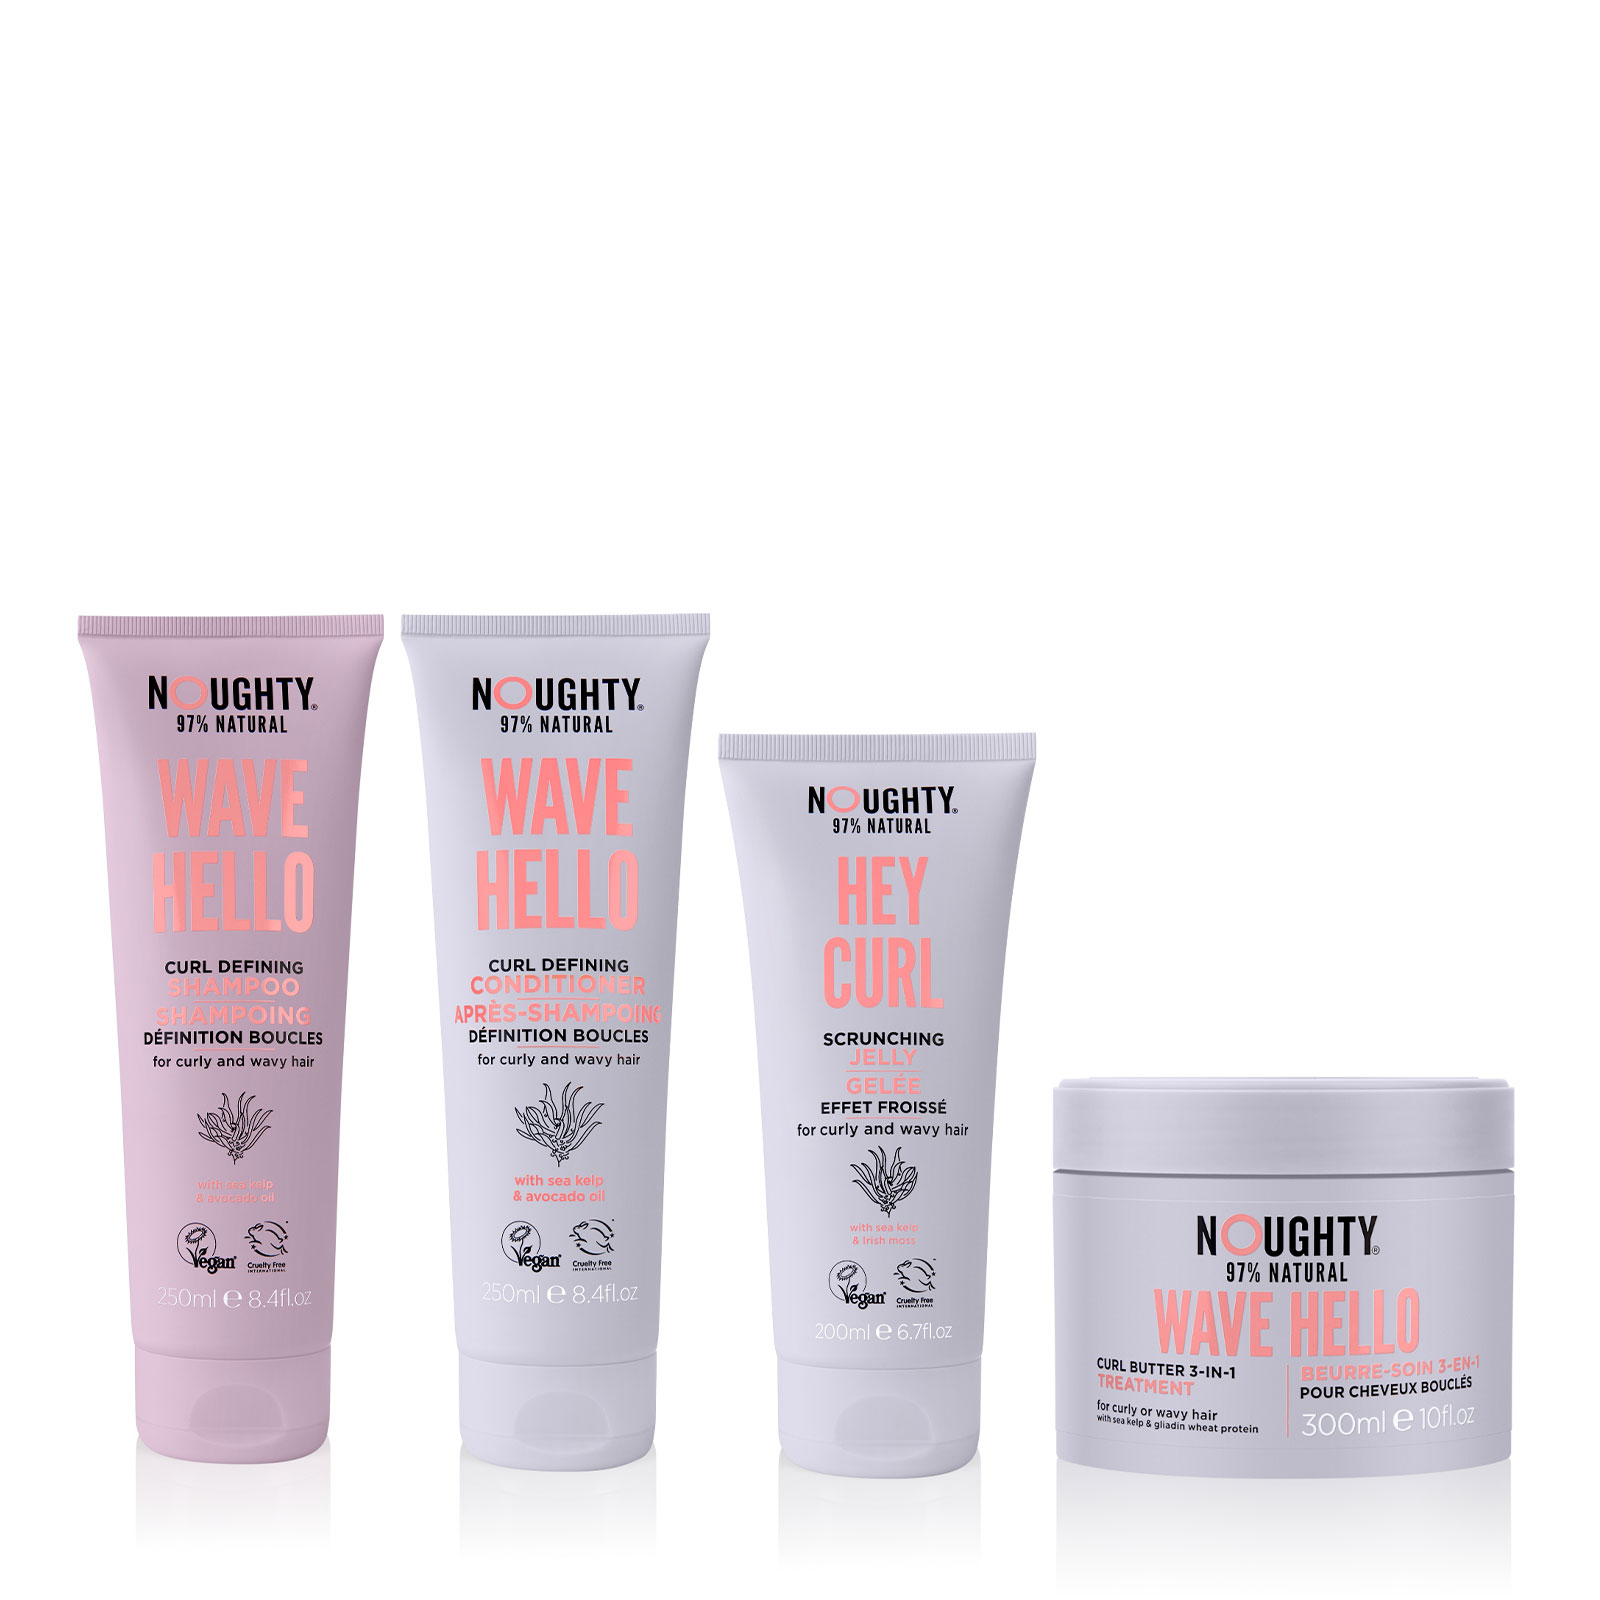 Noughty Wave Hello The Curls Kit